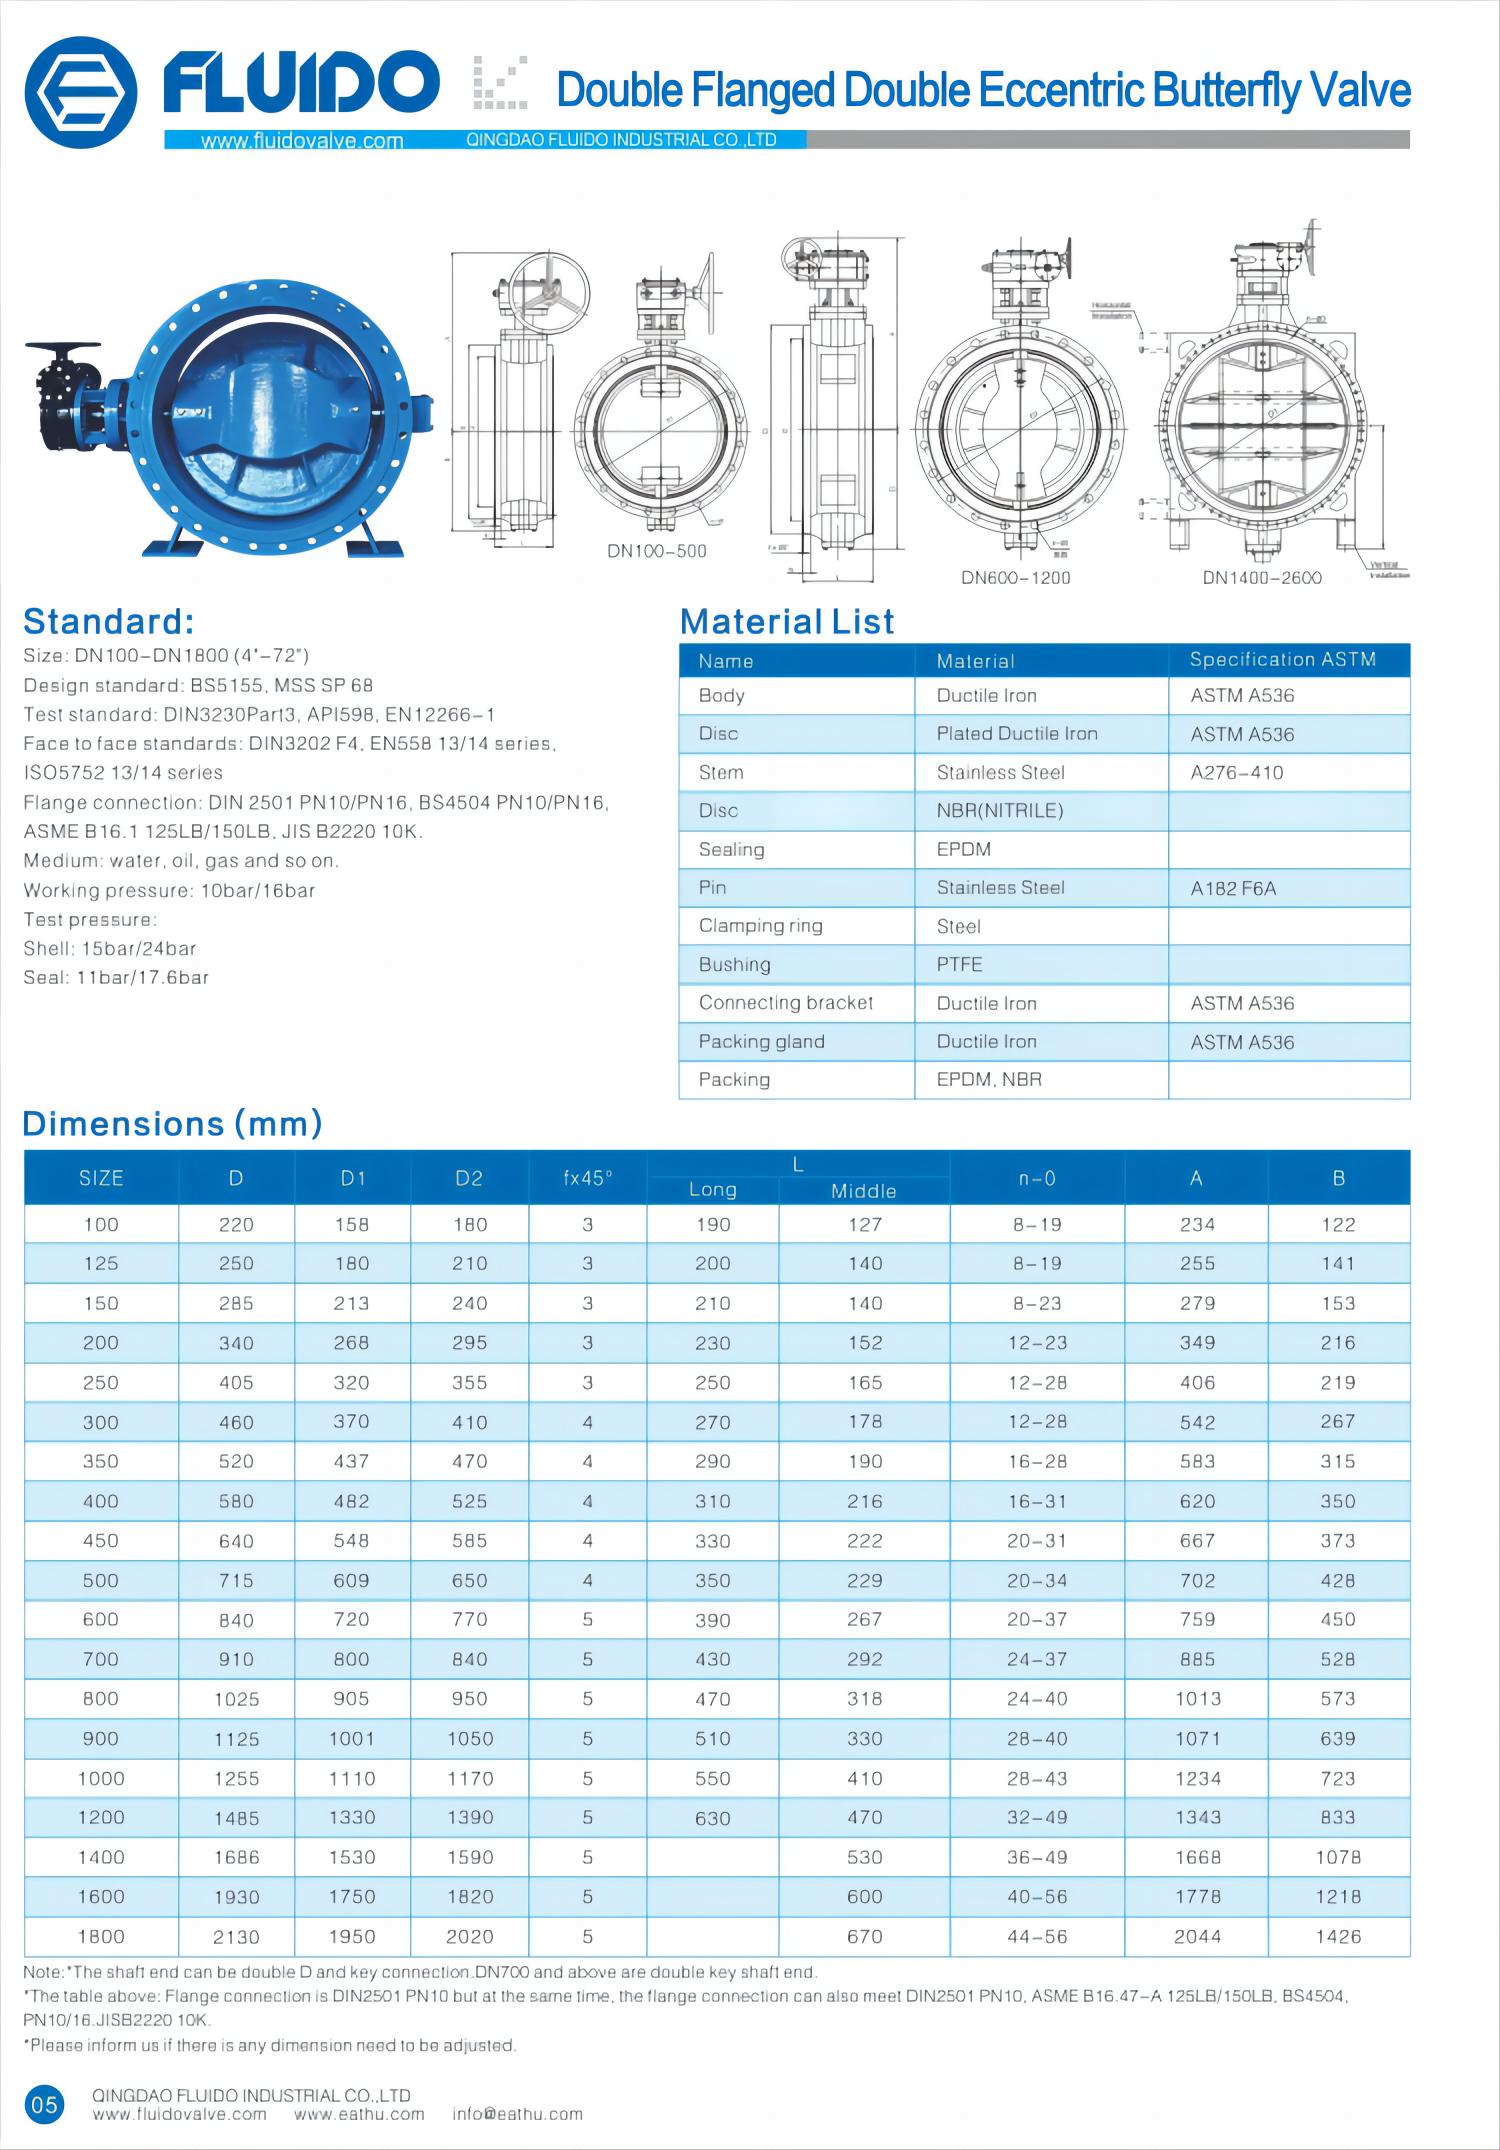 05 Double Flanged Double Eccentric Butterfly Valve